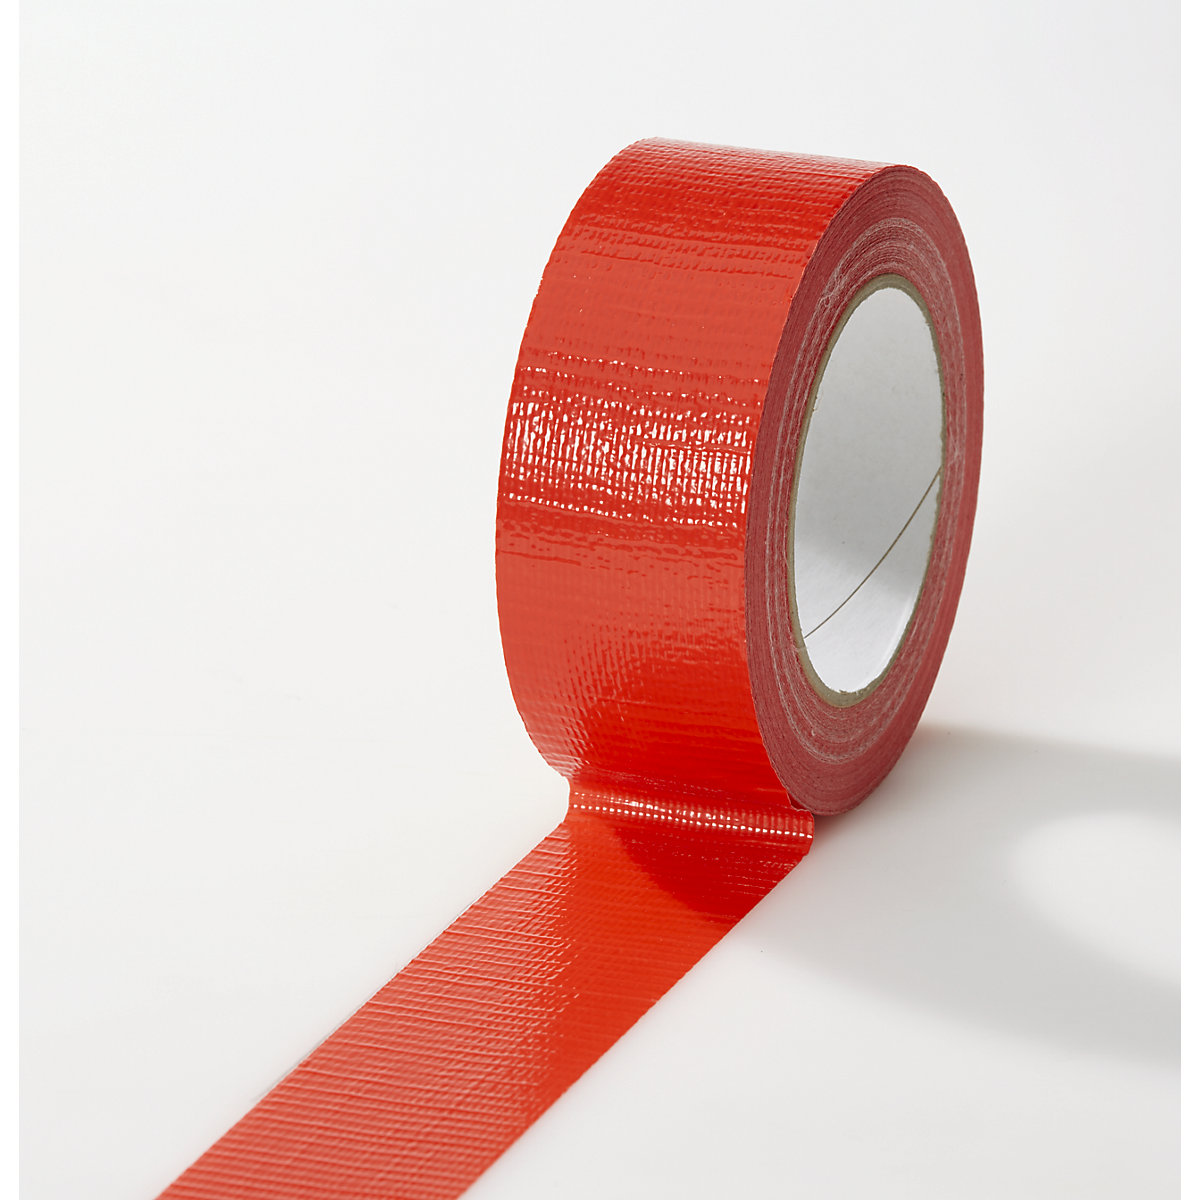 Fabric tape, in different colours, pack of 24 rolls, red, tape width 38 mm-9